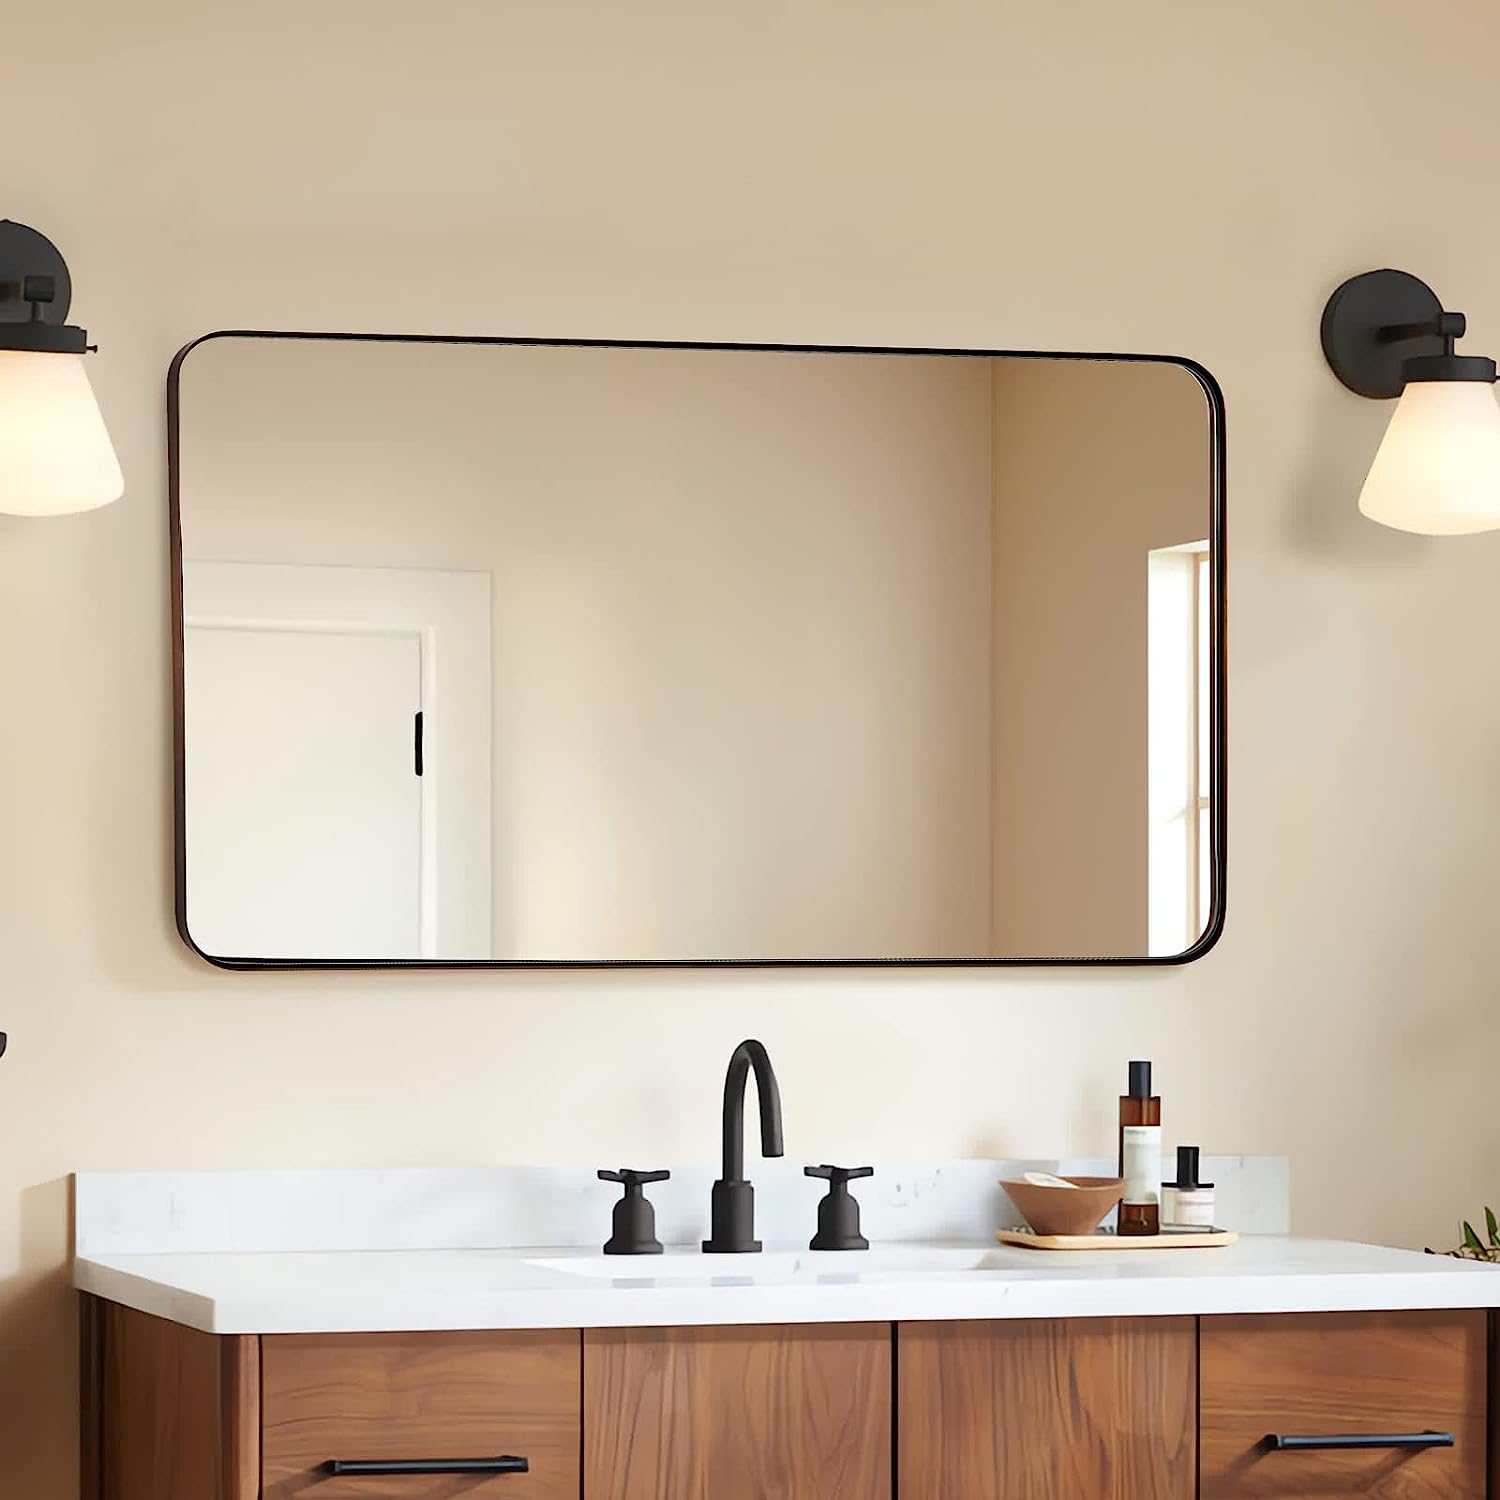 Contemporary Rounded Rectangle Mirror for Bathroom/Vanity | Stainless Steel Frame